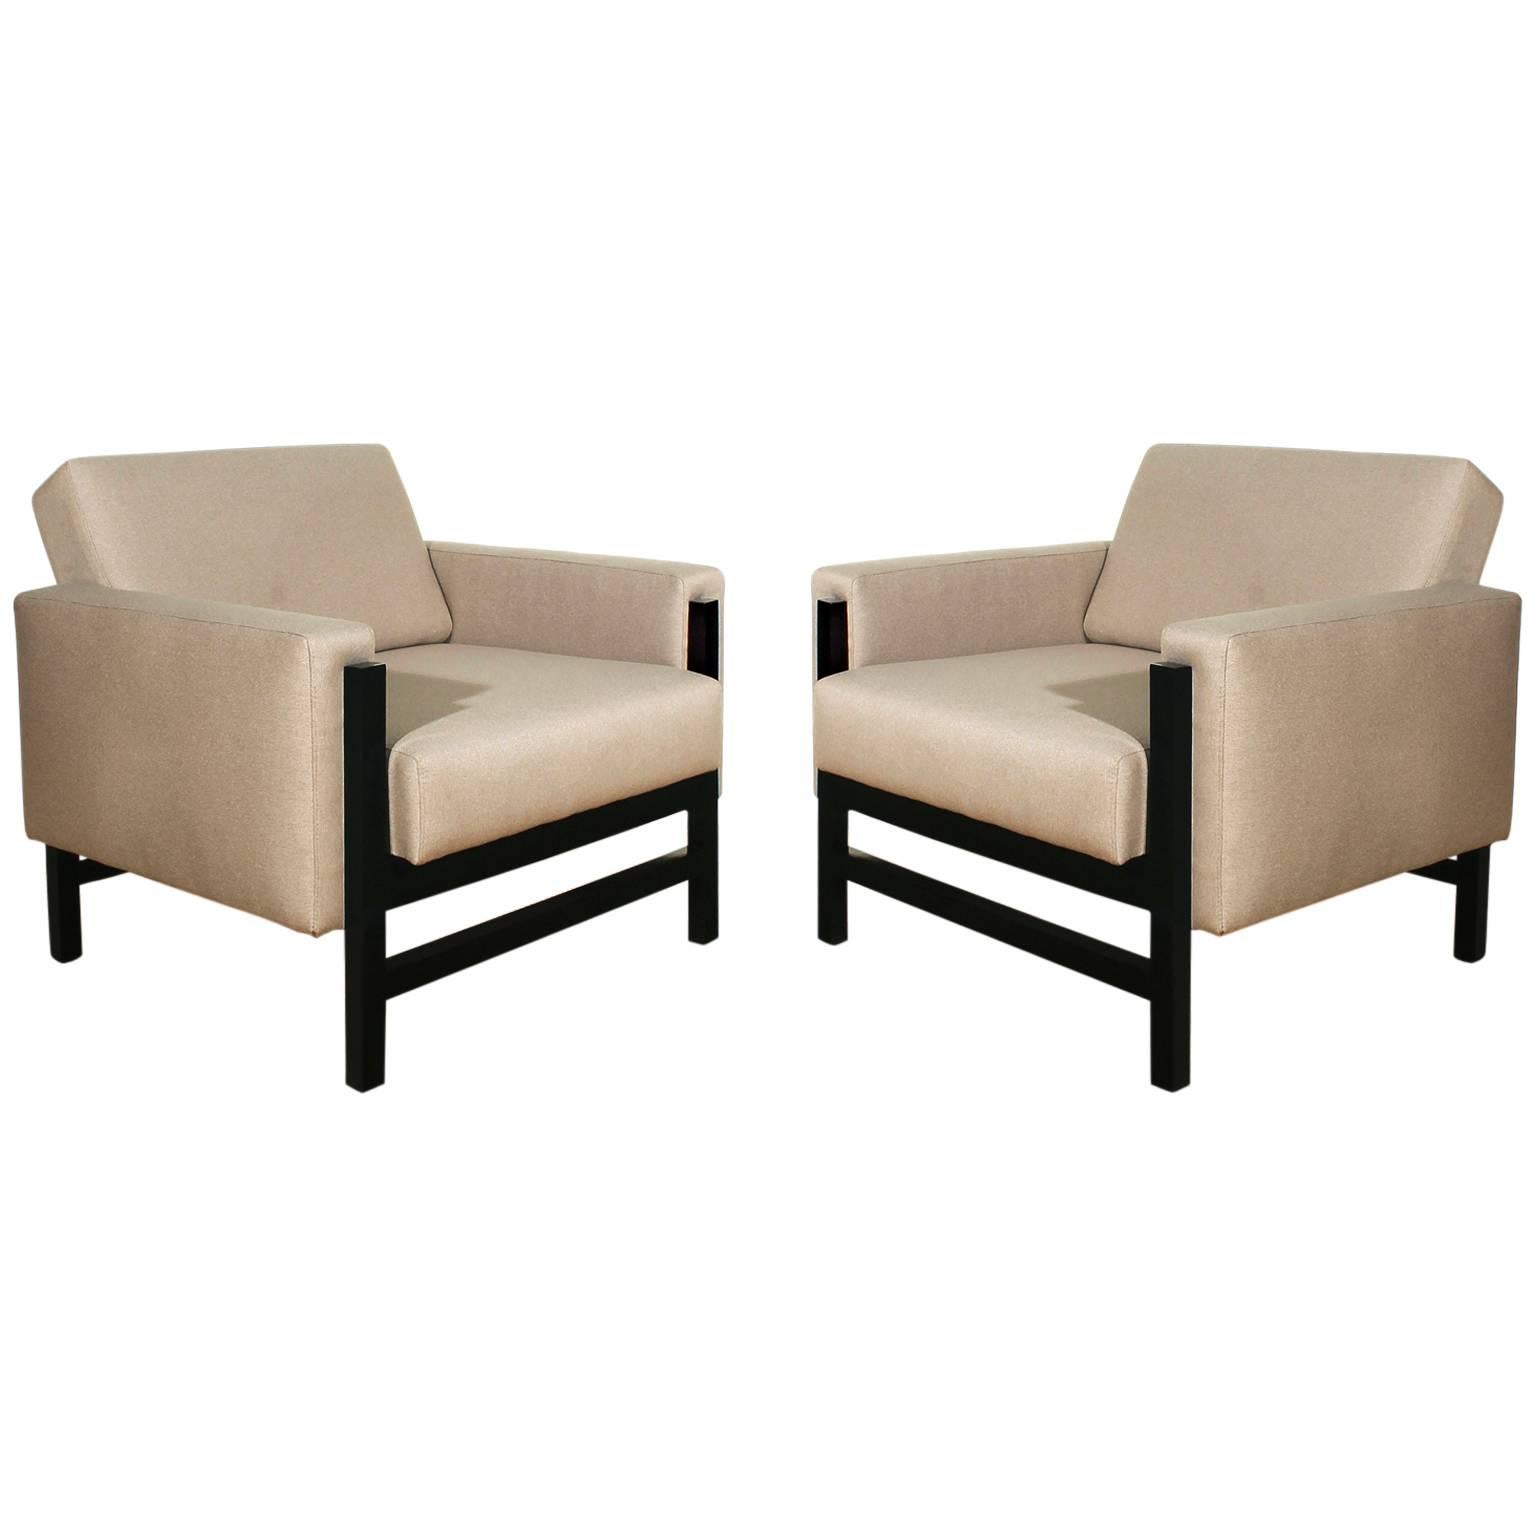 Pair of Cubist Armchairs from the 1960s